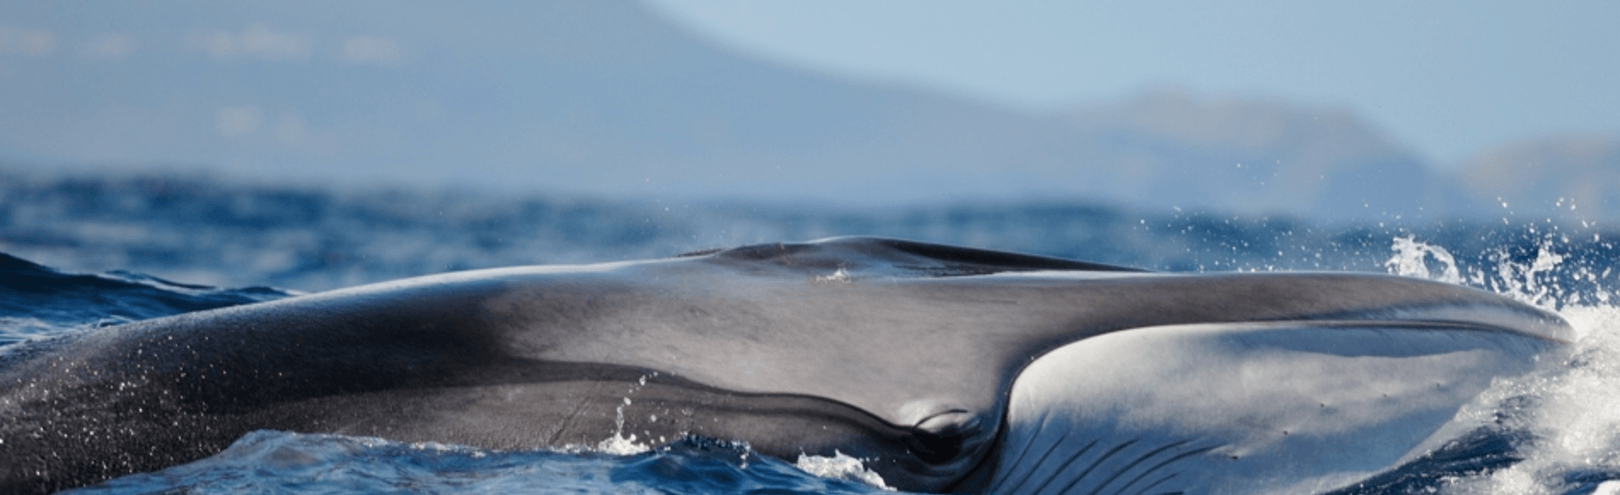 Detective work at sea: whale research via eDNA - Available at University of Iceland